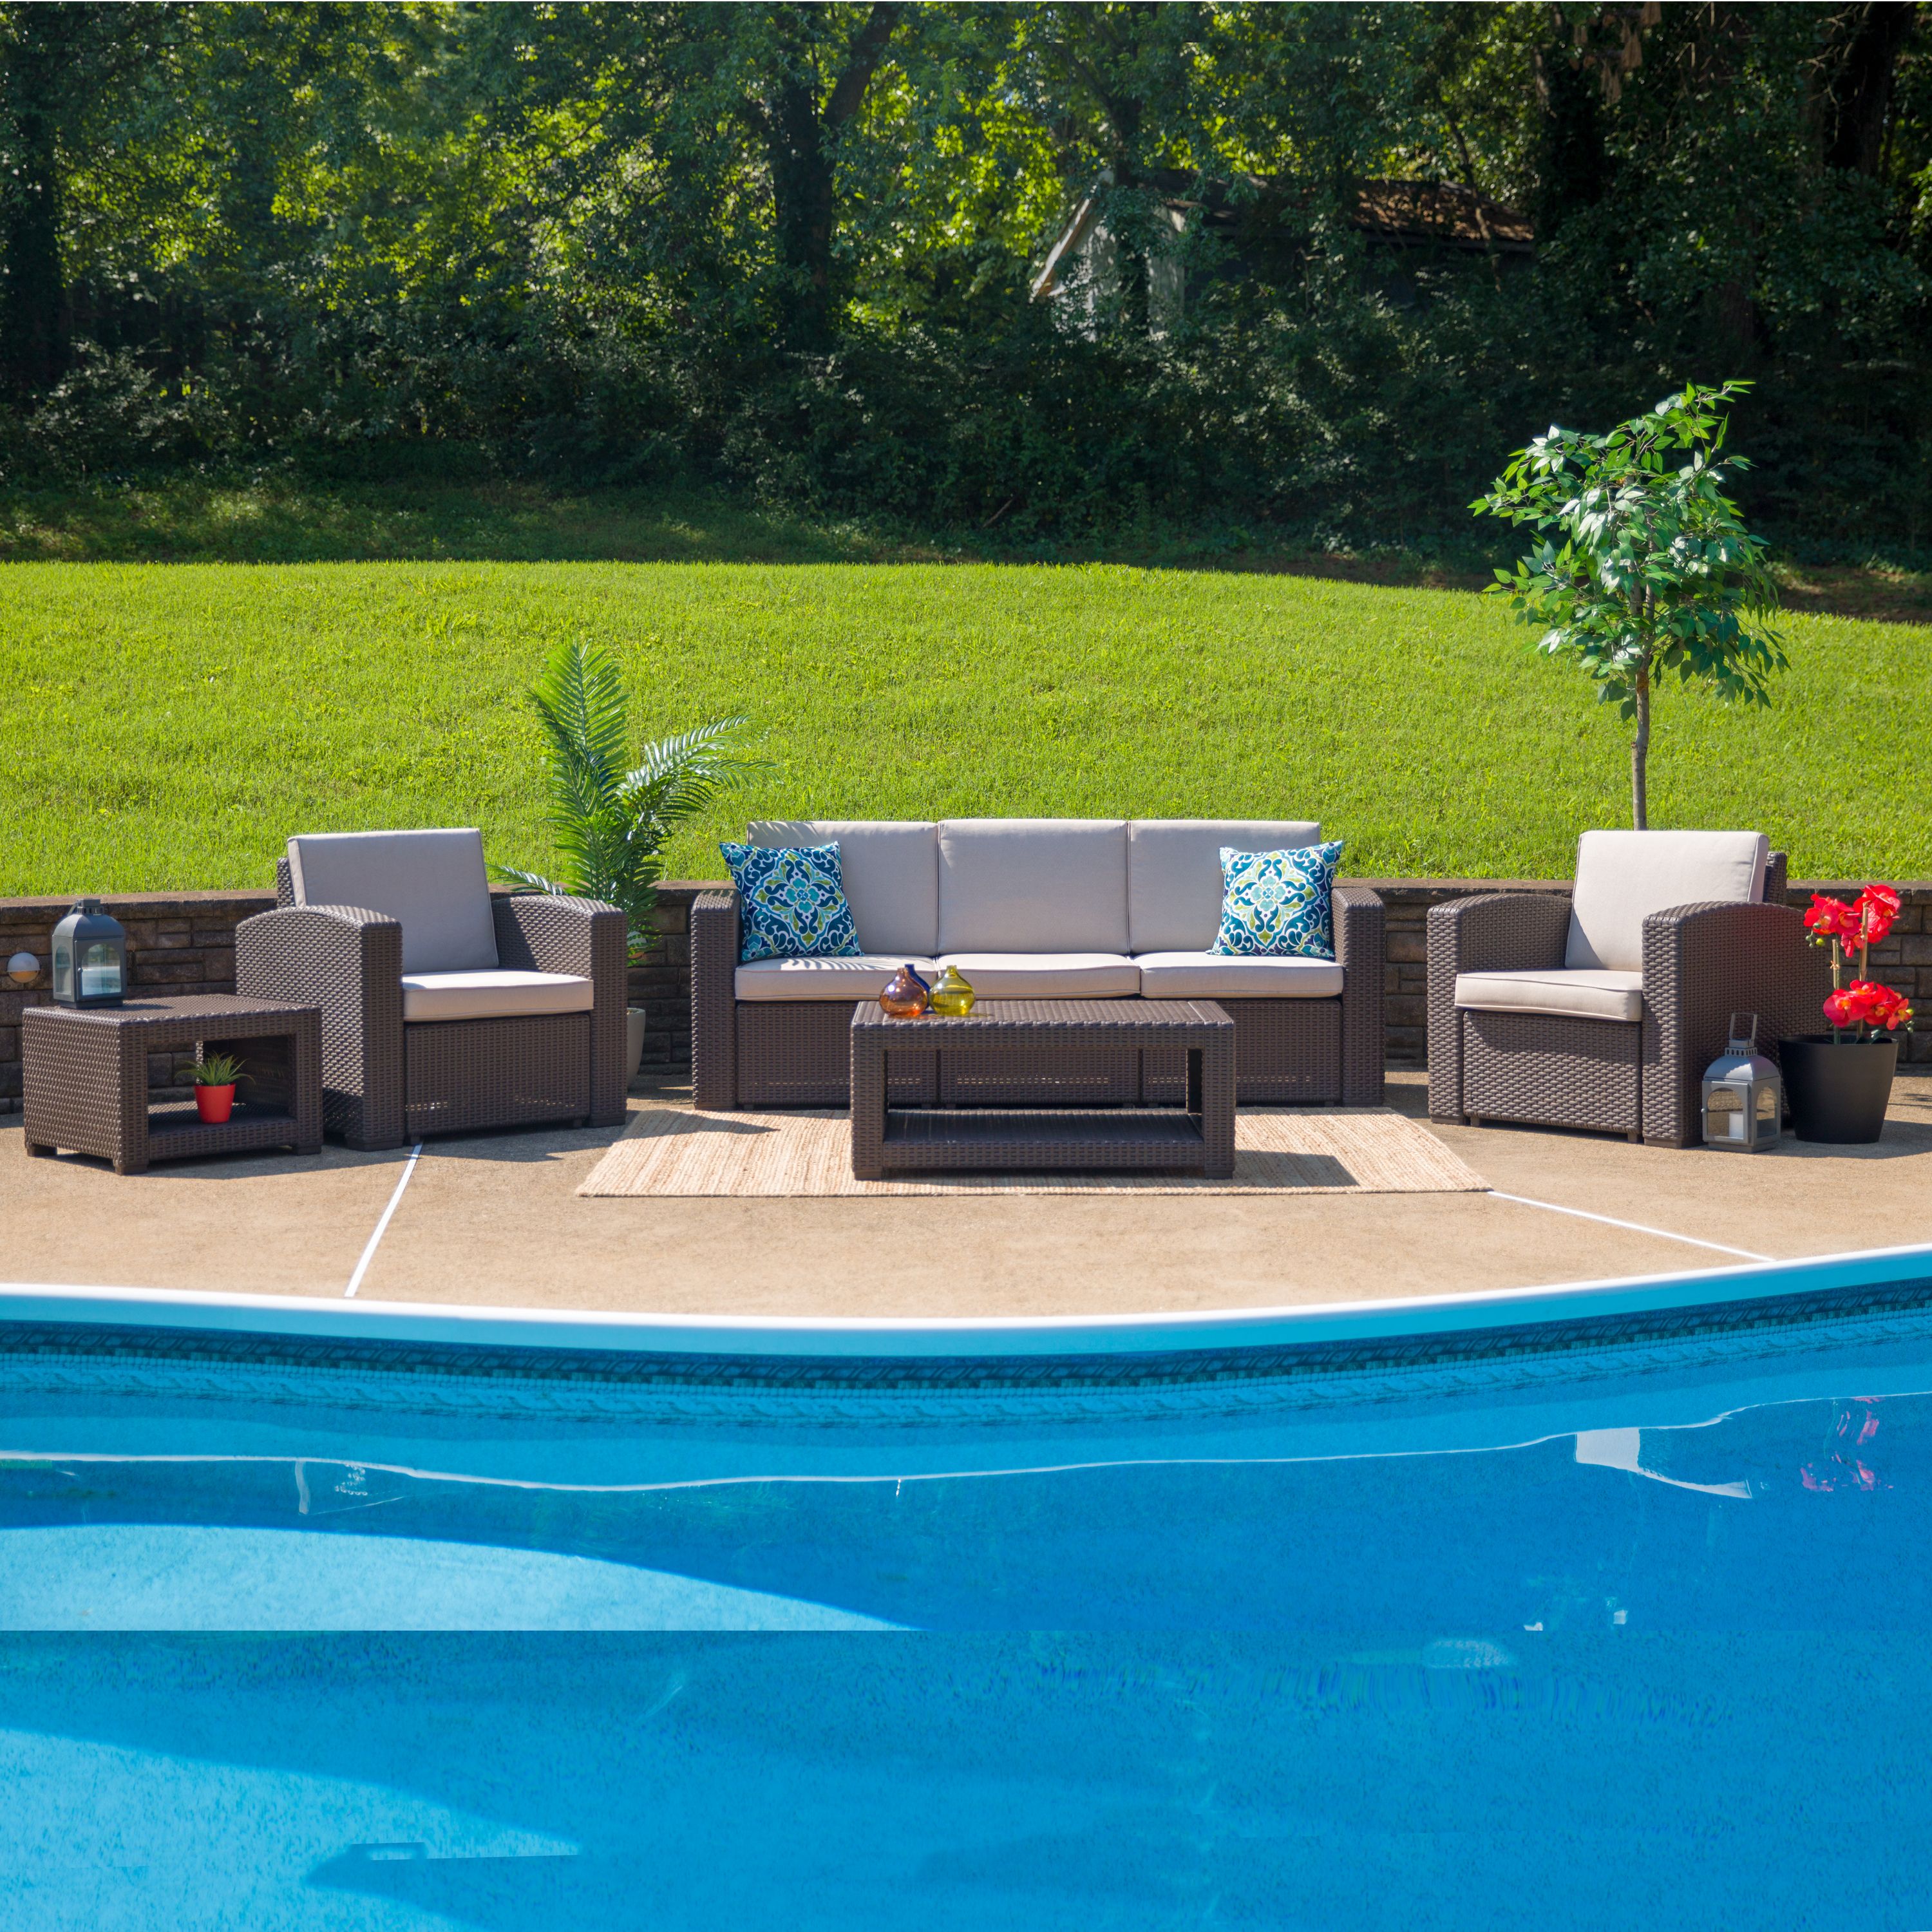 Flash Furniture 5 Piece Outdoor Faux Rattan Chair, Sofa and Table Set in Chocolate Brown - image 1 of 2